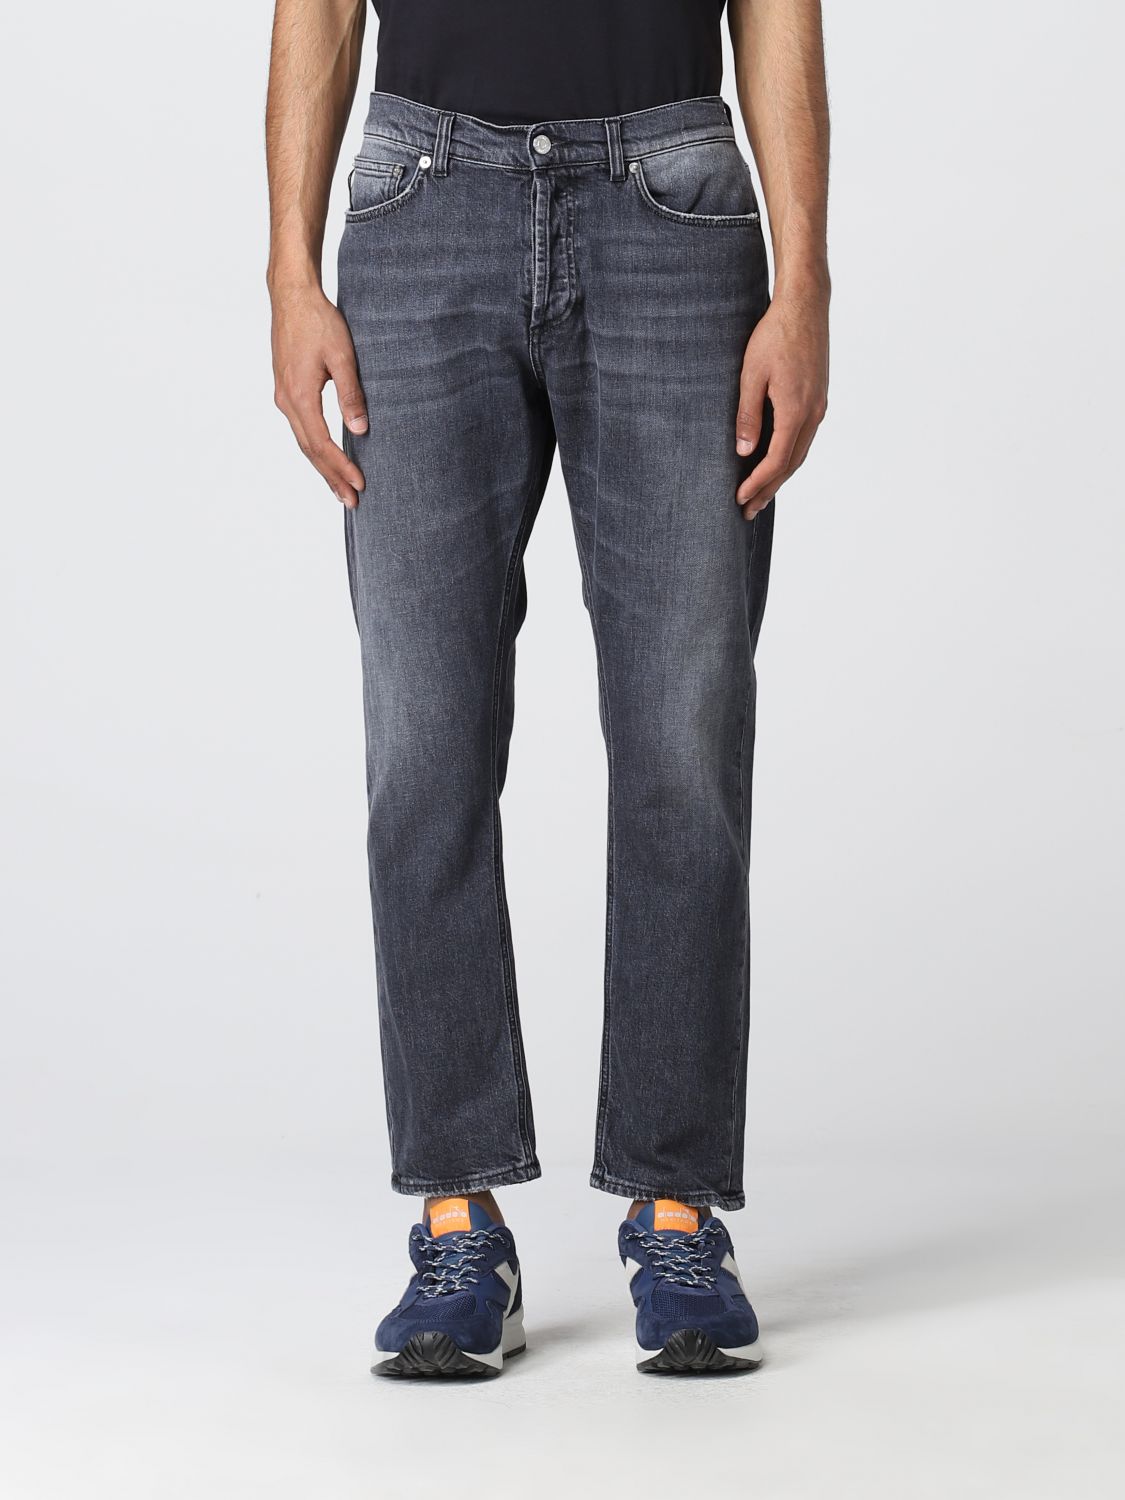 MAURO GRIFONI MAURO GRIFONI 5-POCKET JEANS IN WASHED DENIM,C94395028